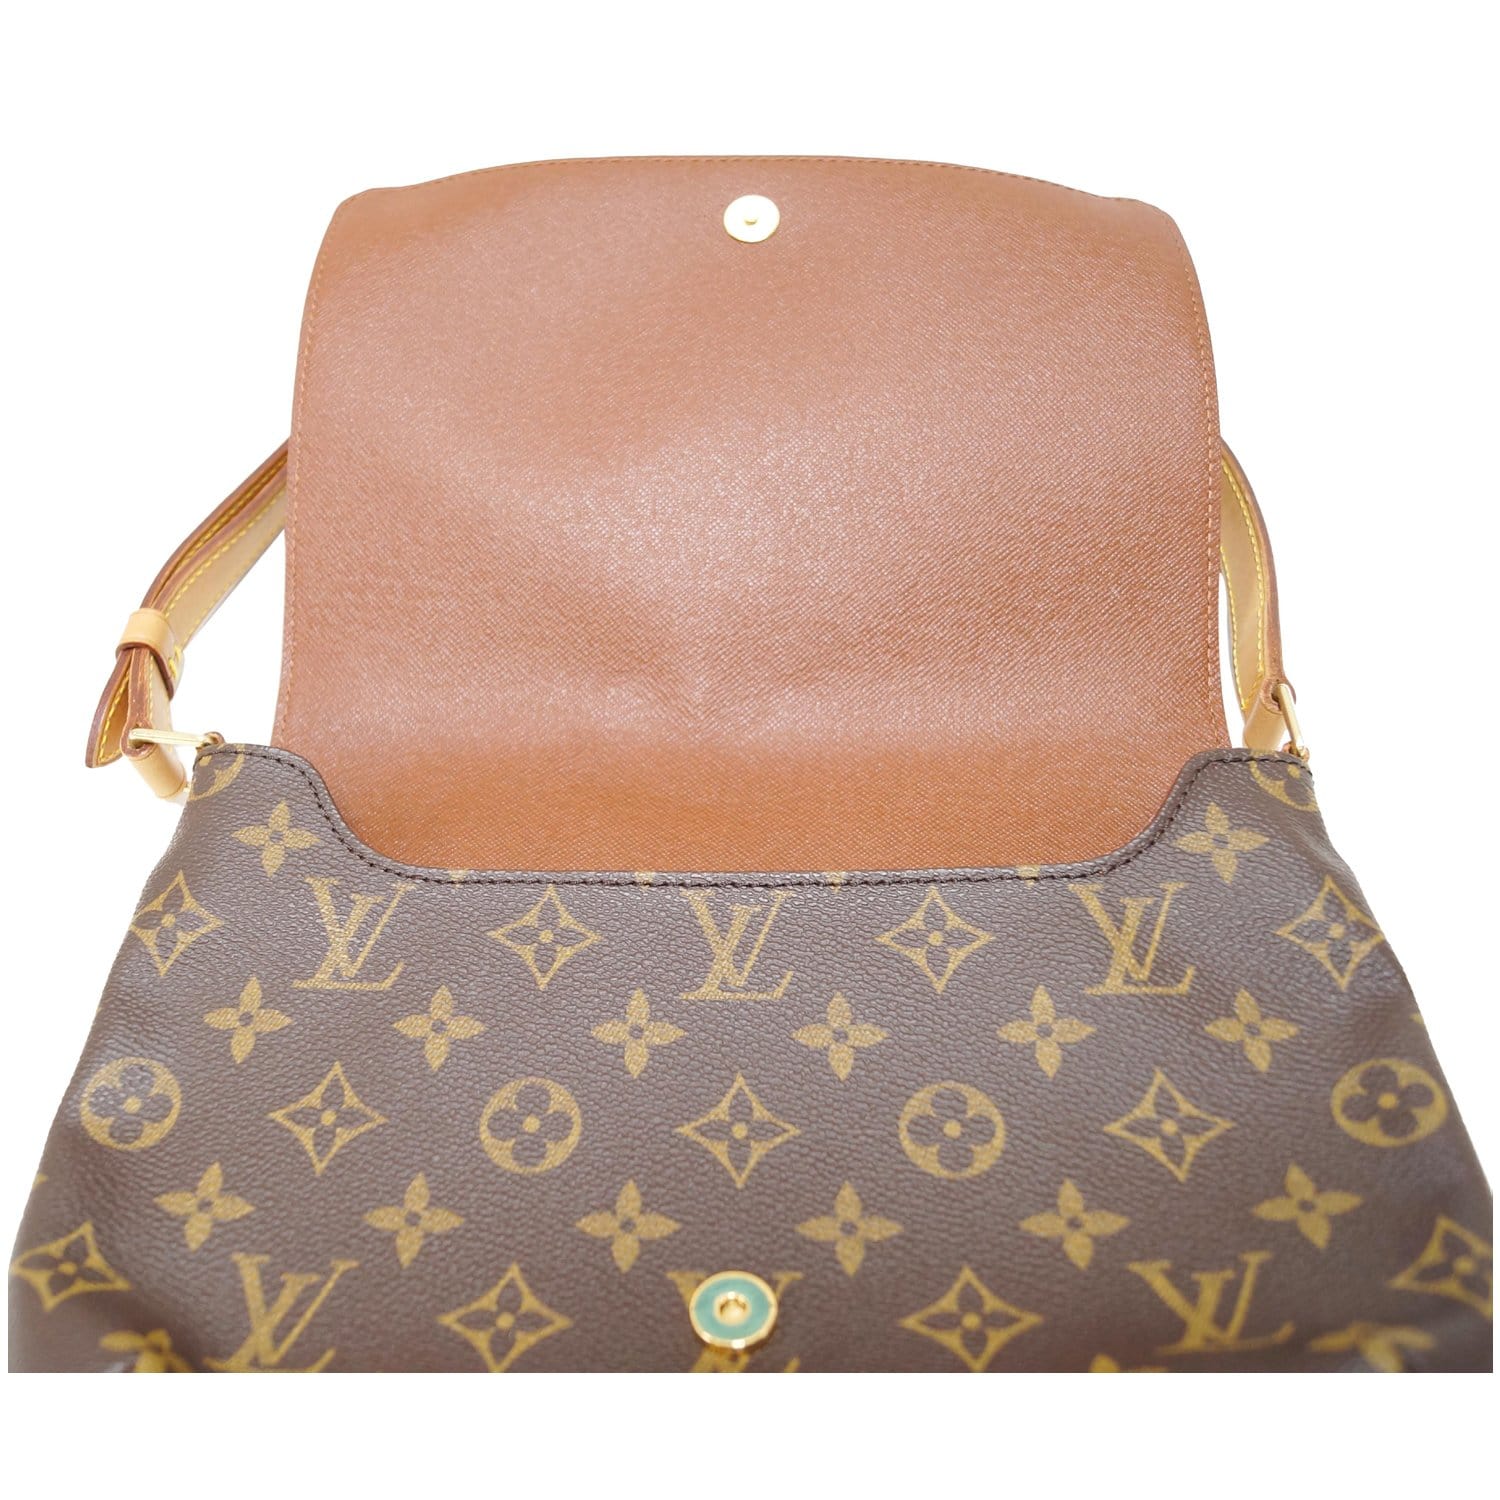 Musette Tango Short Strap, Used & Preloved Louis Vuitton Shoulder Bag, LXR Canada, Brown